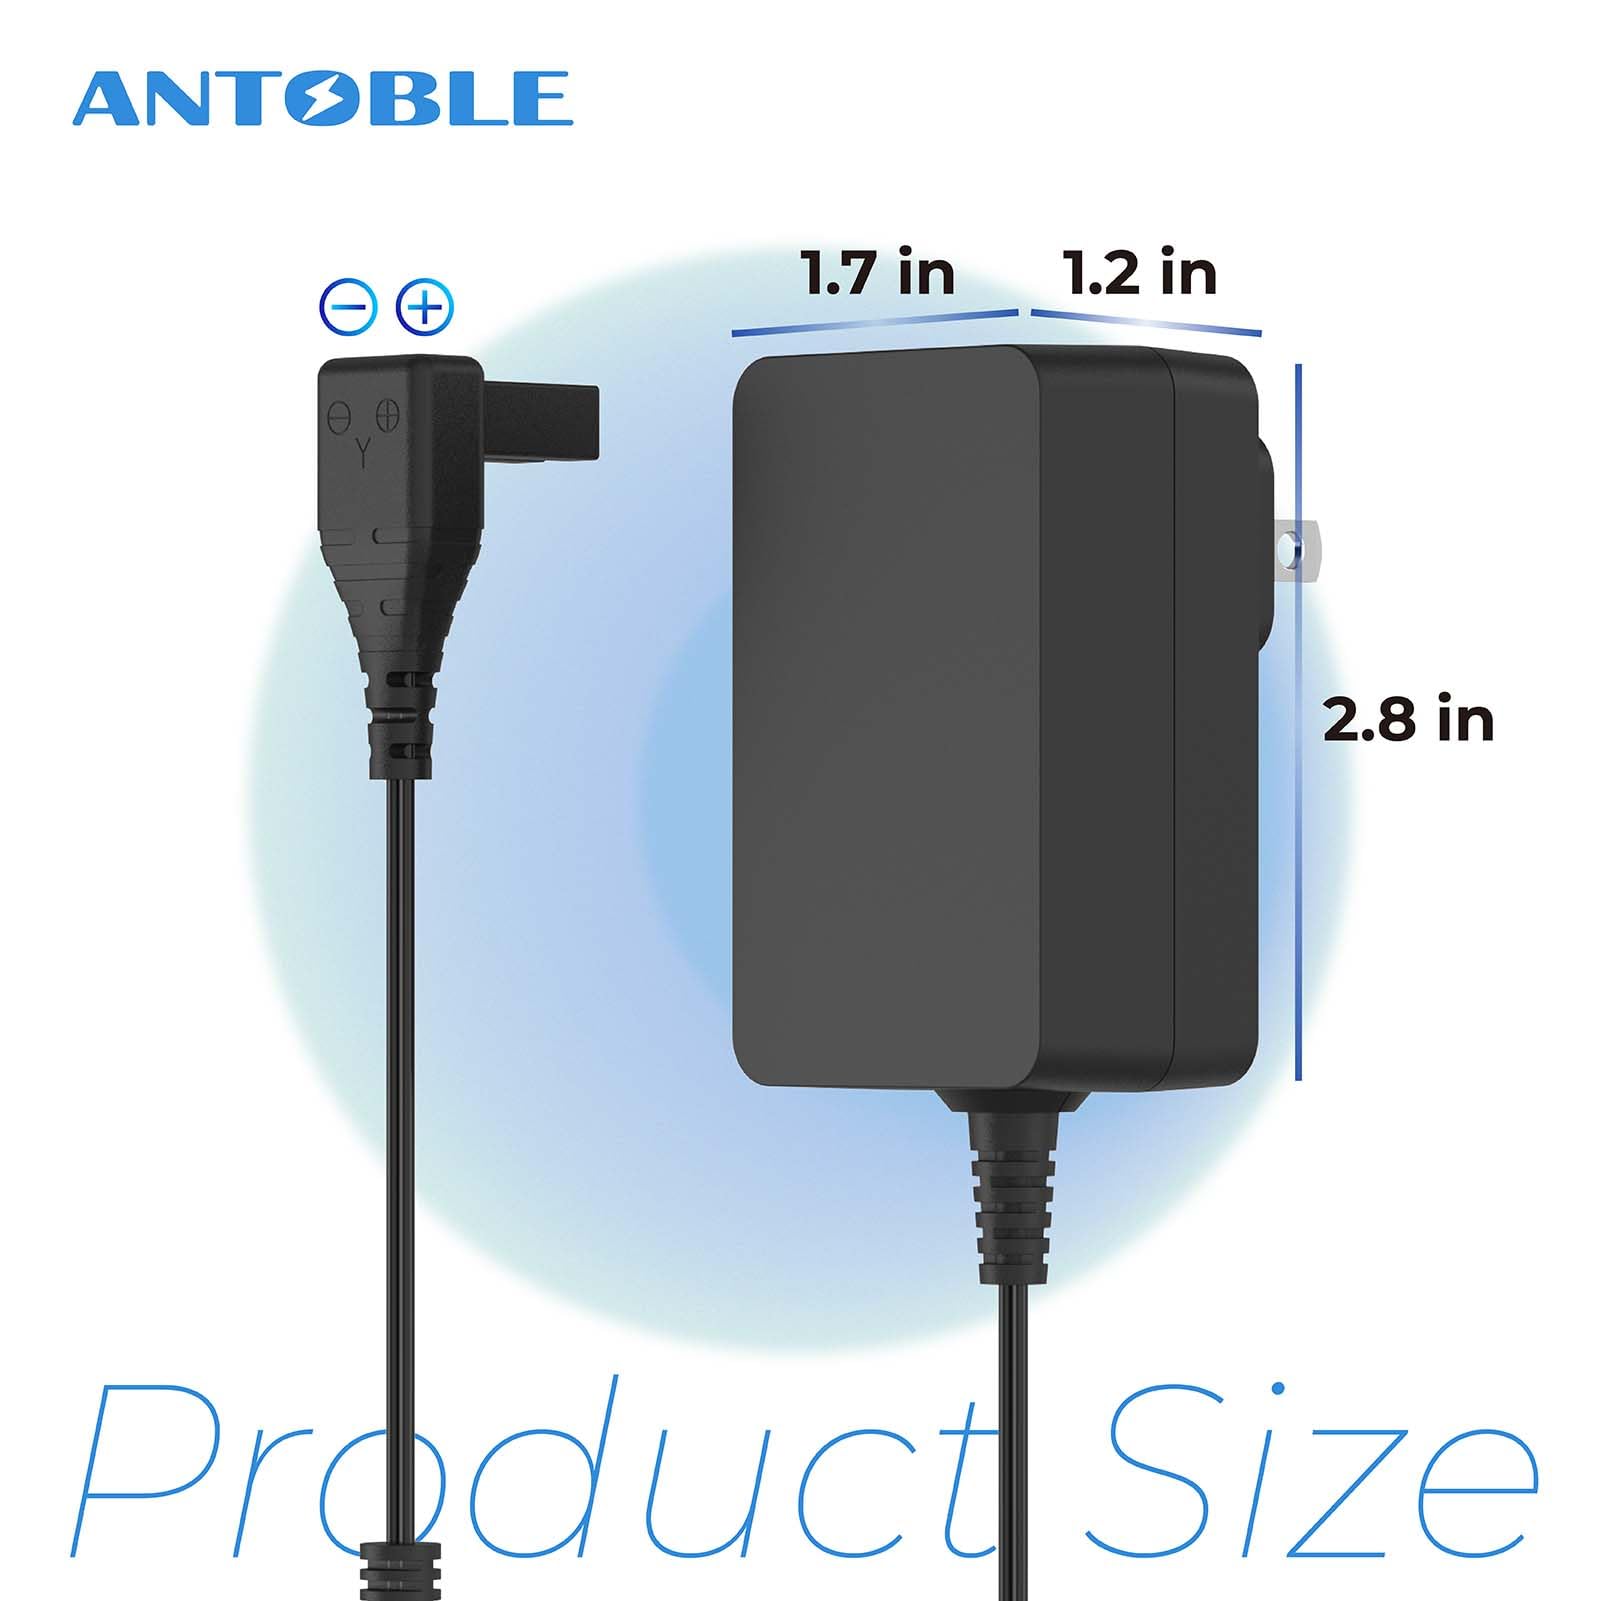 ANTOBLE 12.6V Charger Compatible with Aiper Seagull 1000 600 Smart Pool Cleaner Power Adapter Cord Replacement Parts Pool Vacuum Power Supply for Aiper HJ1103J Automatic Robotic Vac Cleaner Charger